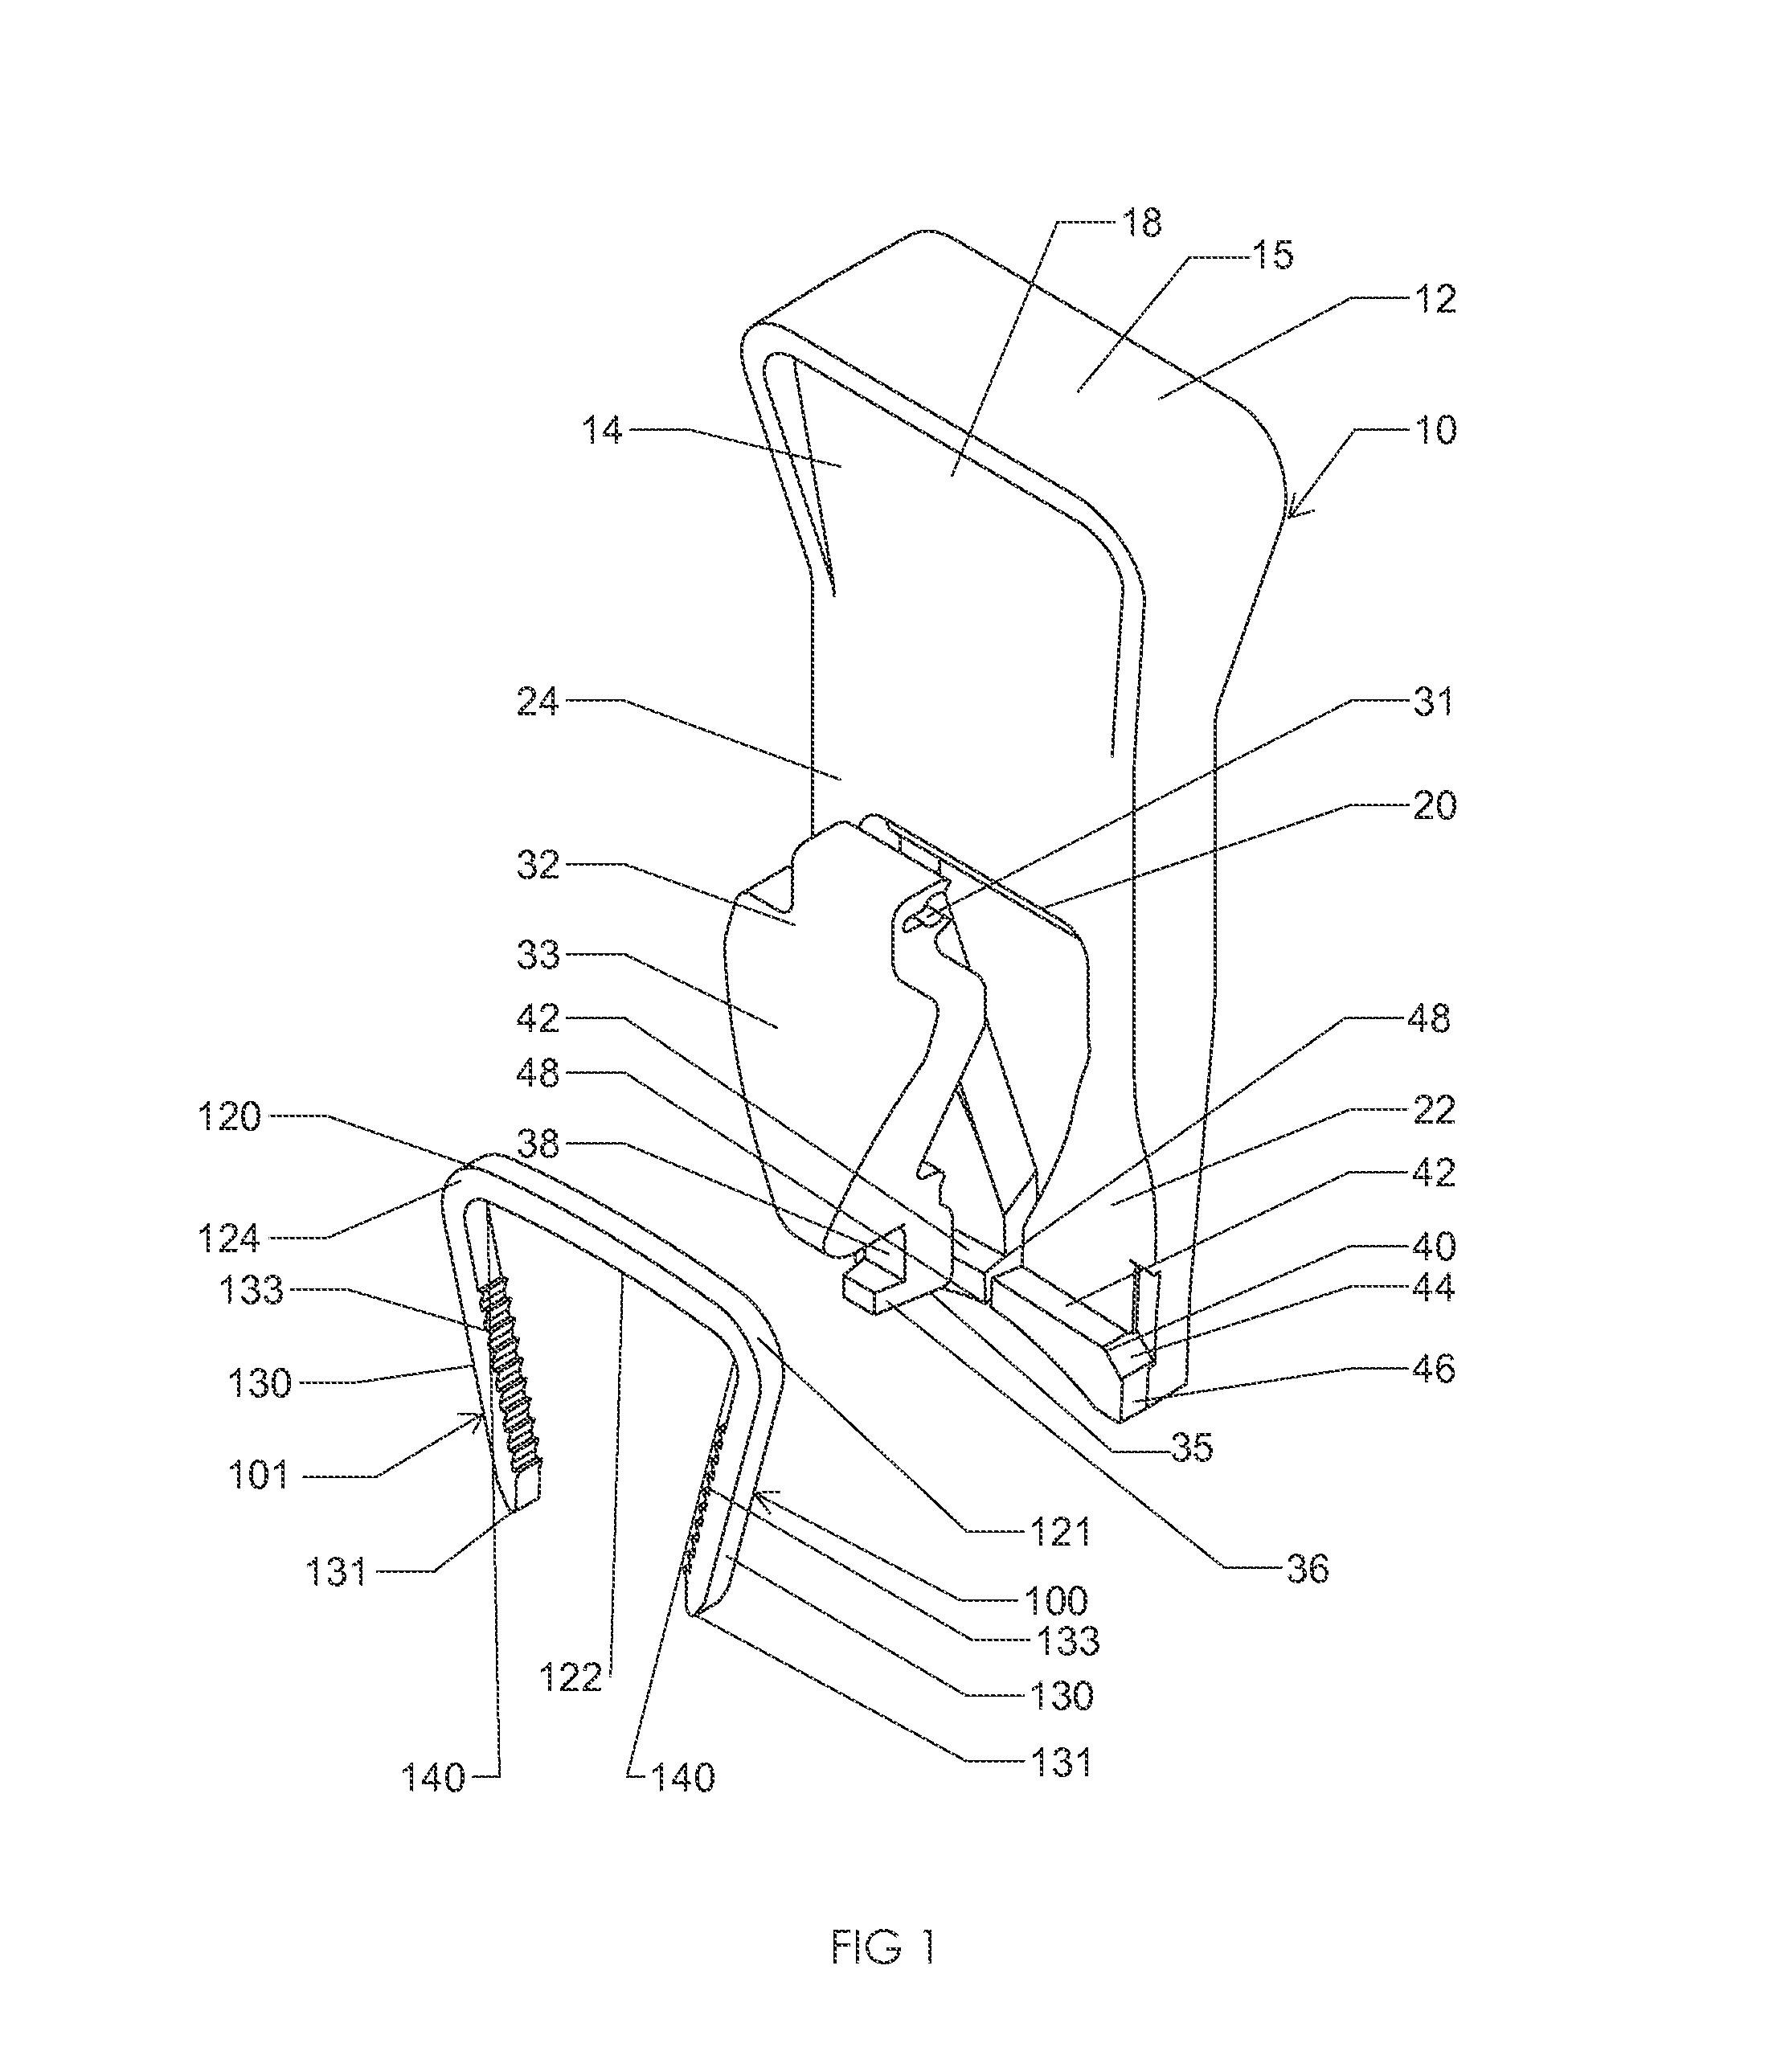 Method and apparatus for loading and implanting a shape memory implant